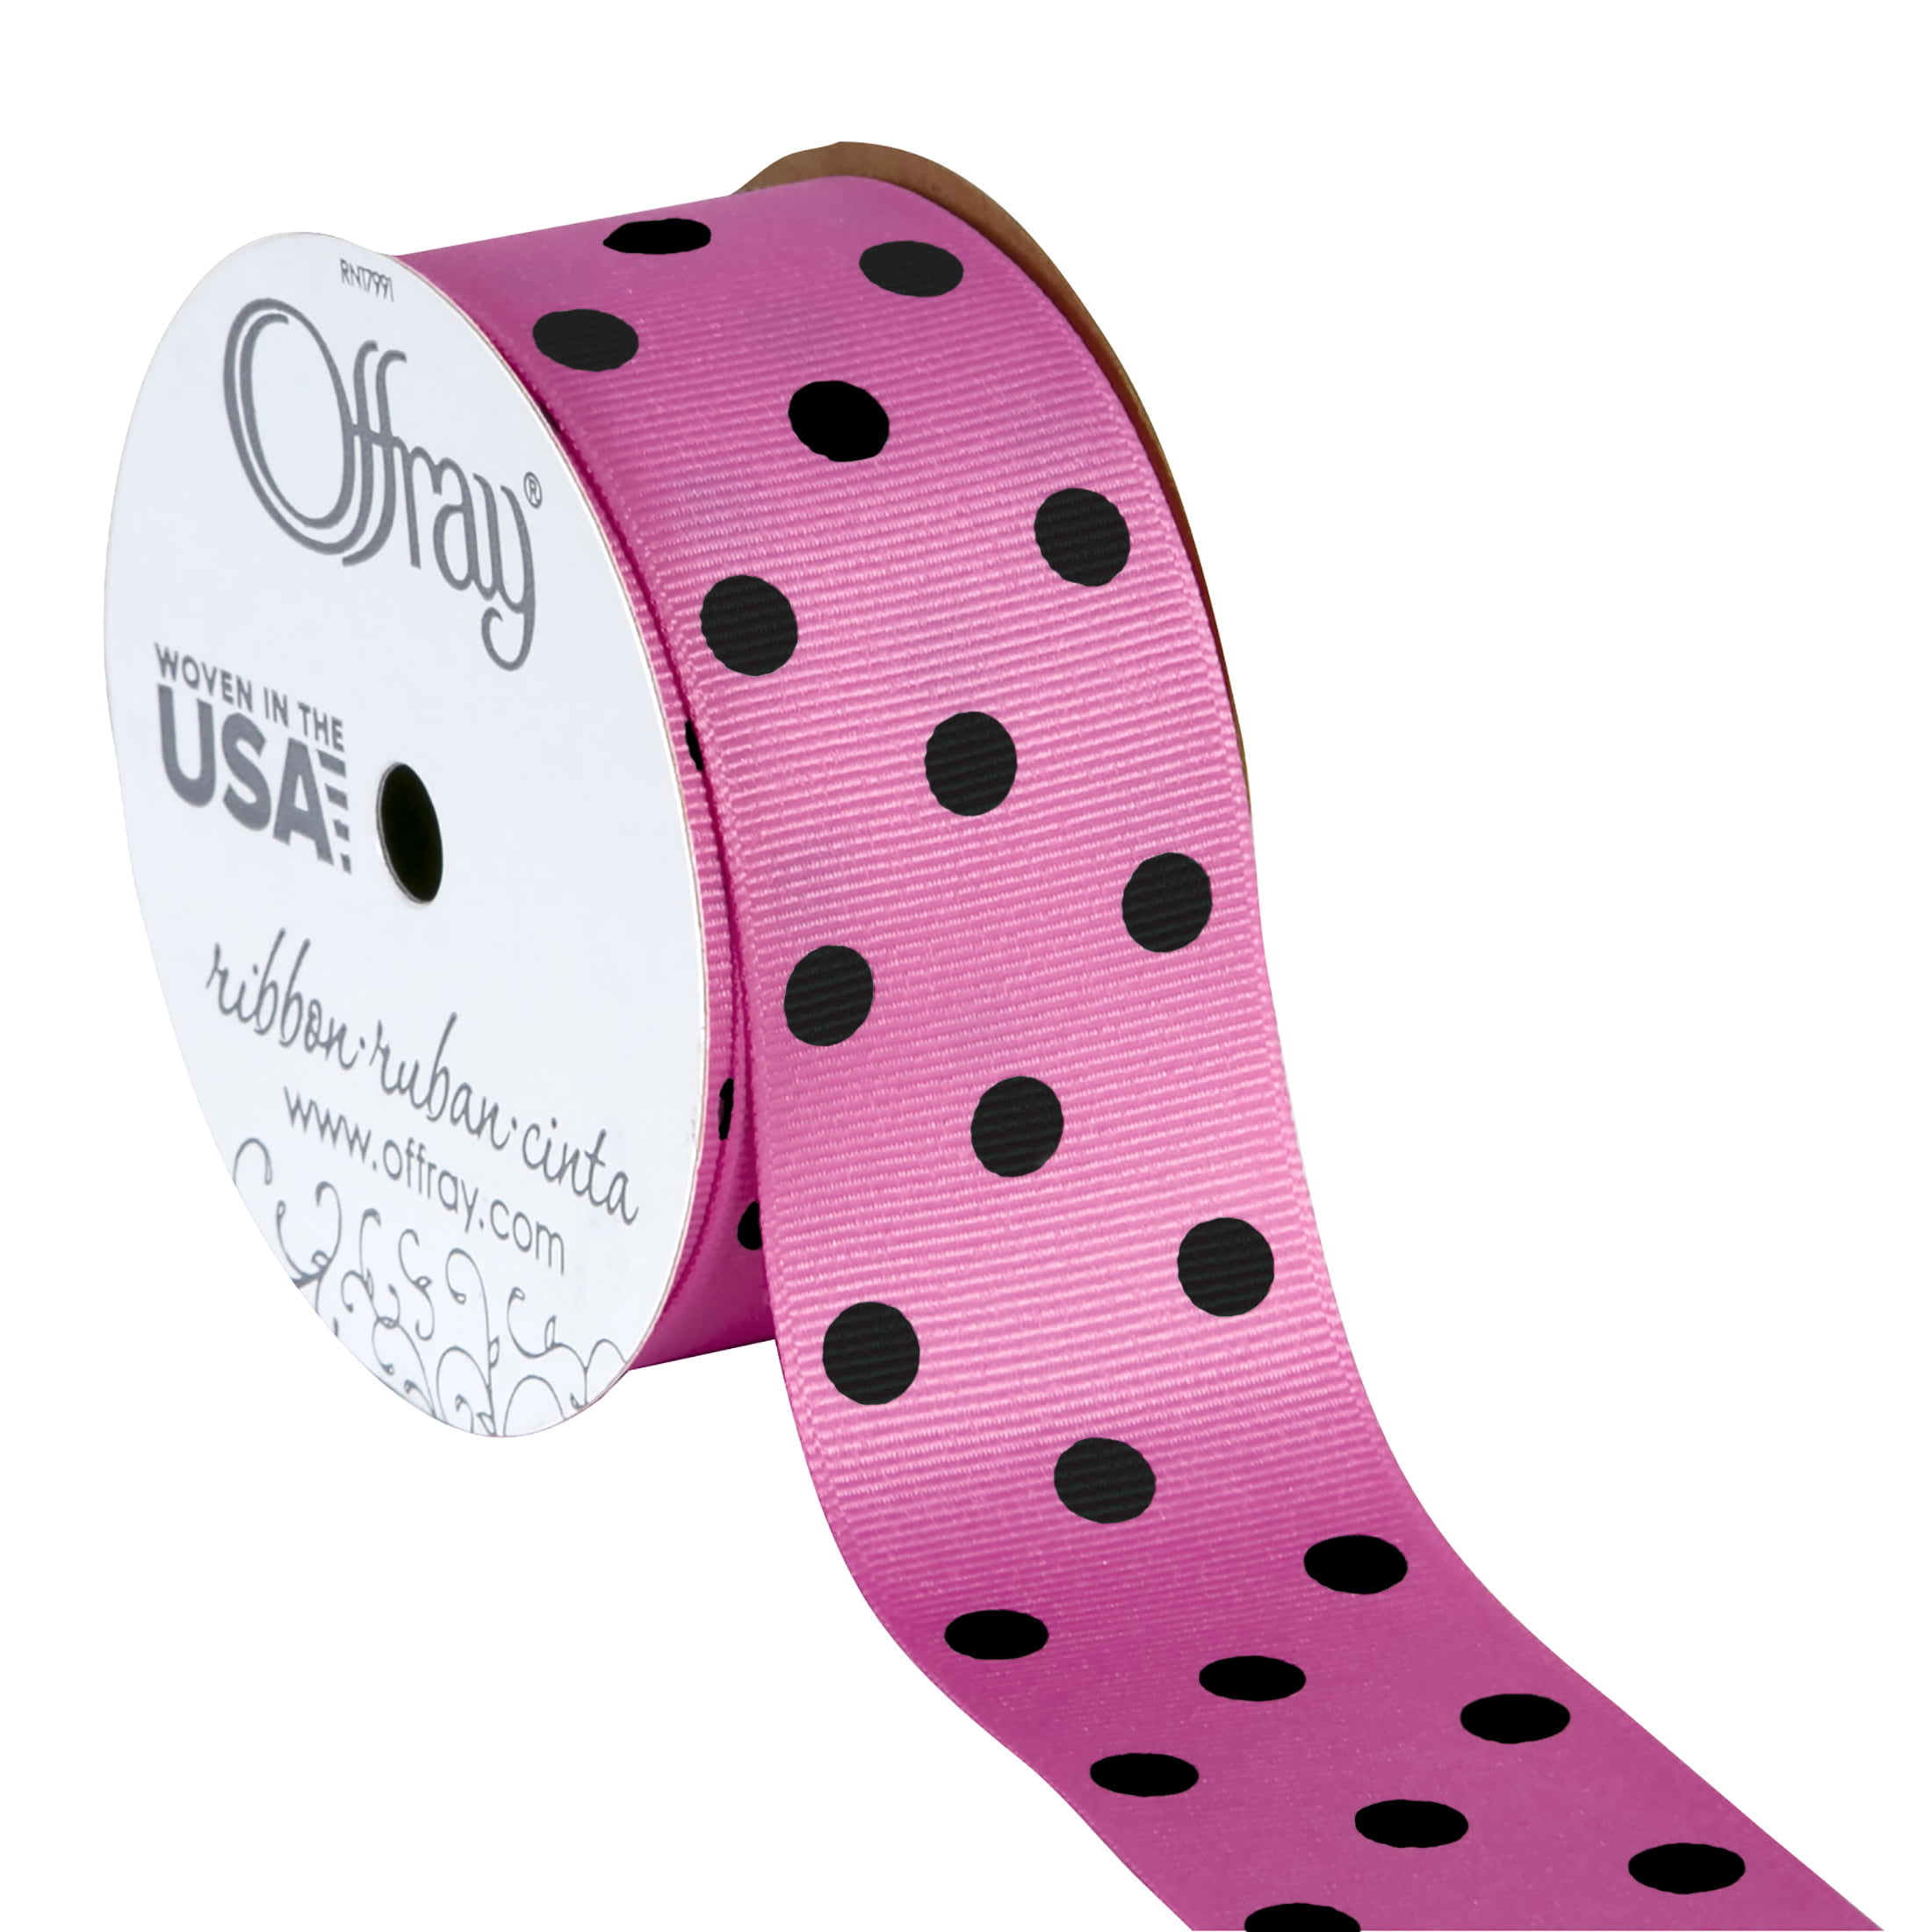 Offray Ribbon, Hot Pink with Black Polka Dots 1 1/2 inch Grosgrain  Polyester Ribbon for Sewing, Crafts, and Gifting, 9 feet, 1 Each - DroneUp  Delivery